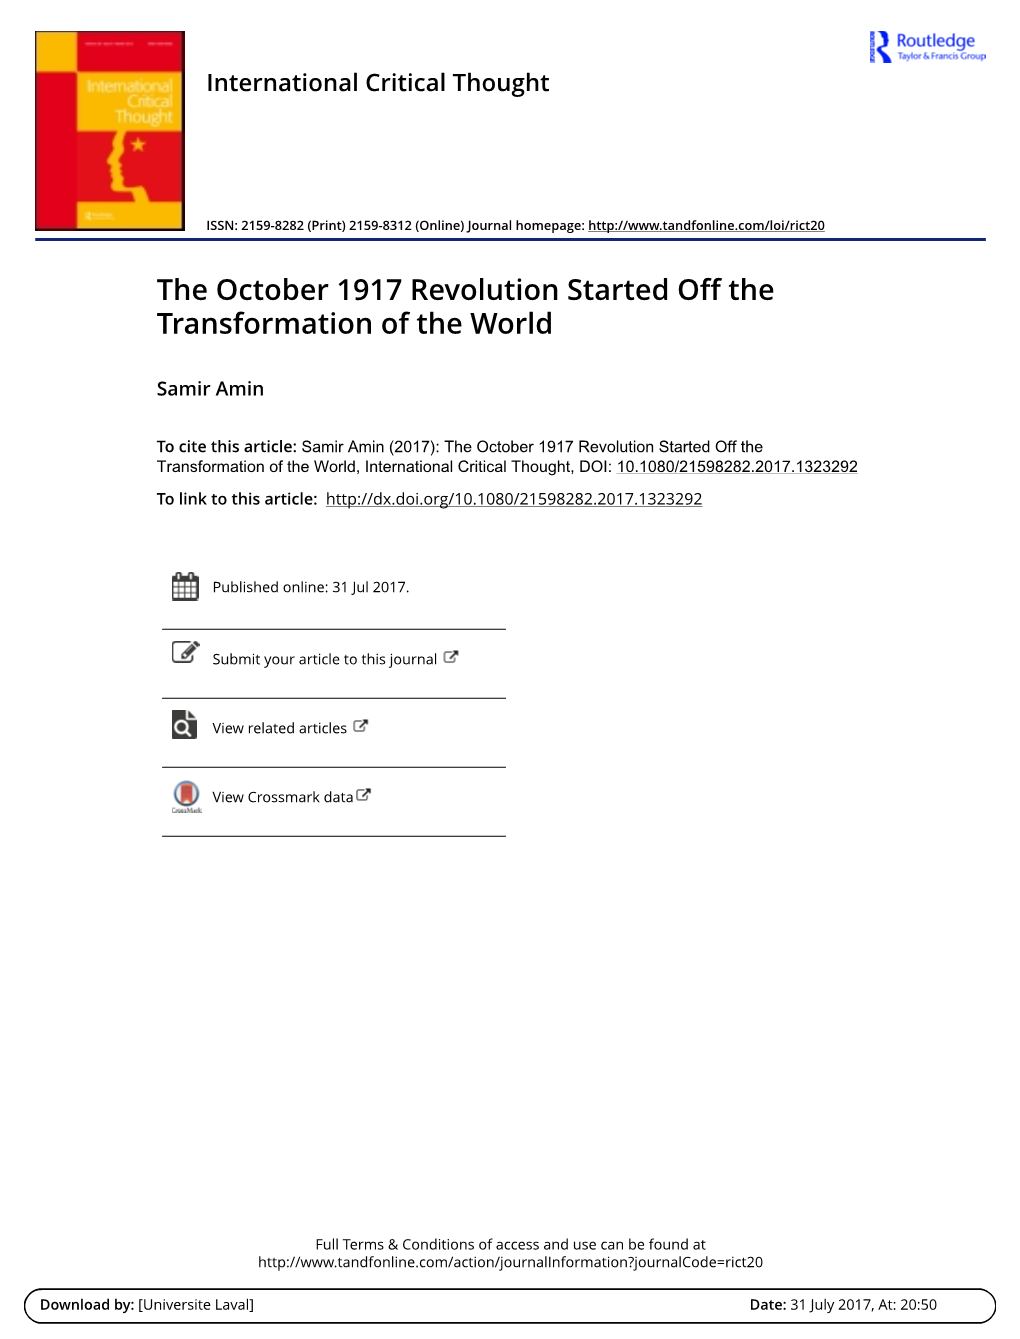 The October 1917 Revolution Started Off the Transformation of the World